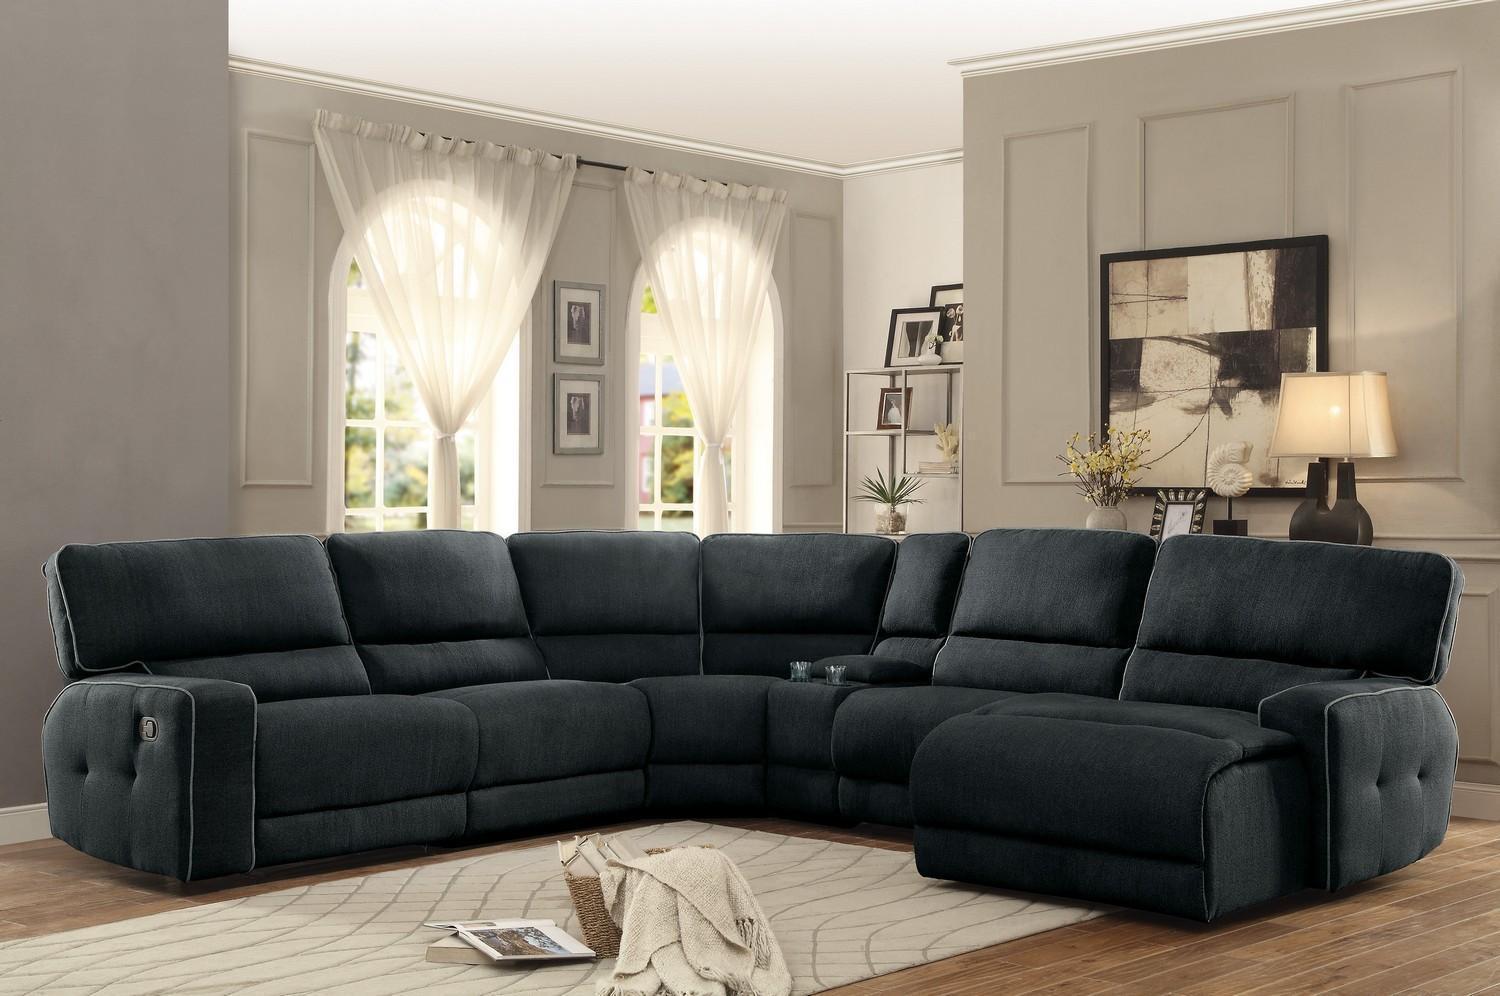 Homelegance Keamey Reclining Sectional